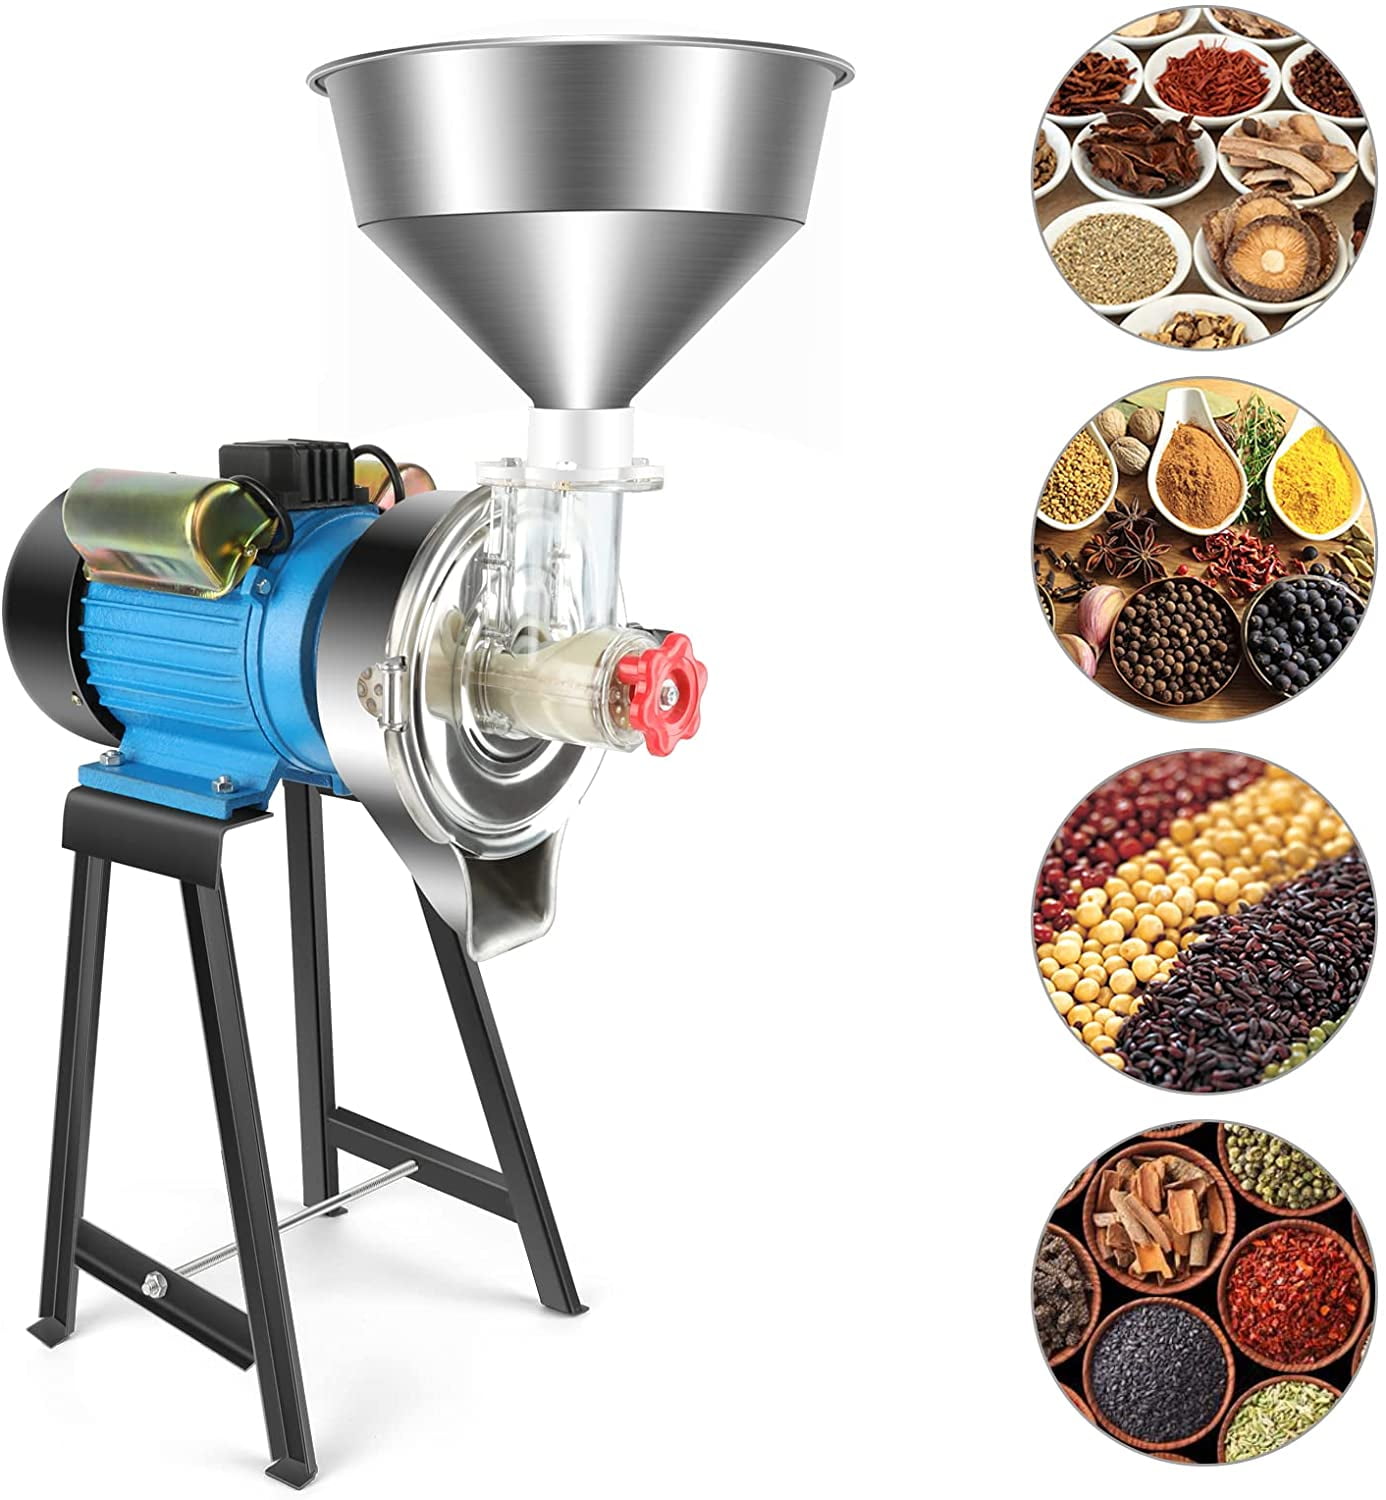 TFCFL 220V Electric Feed Grain Mill Small Kitchen Appliances Cereals Grinder Rice Corn Grain Coffee Wheat Dry Only 